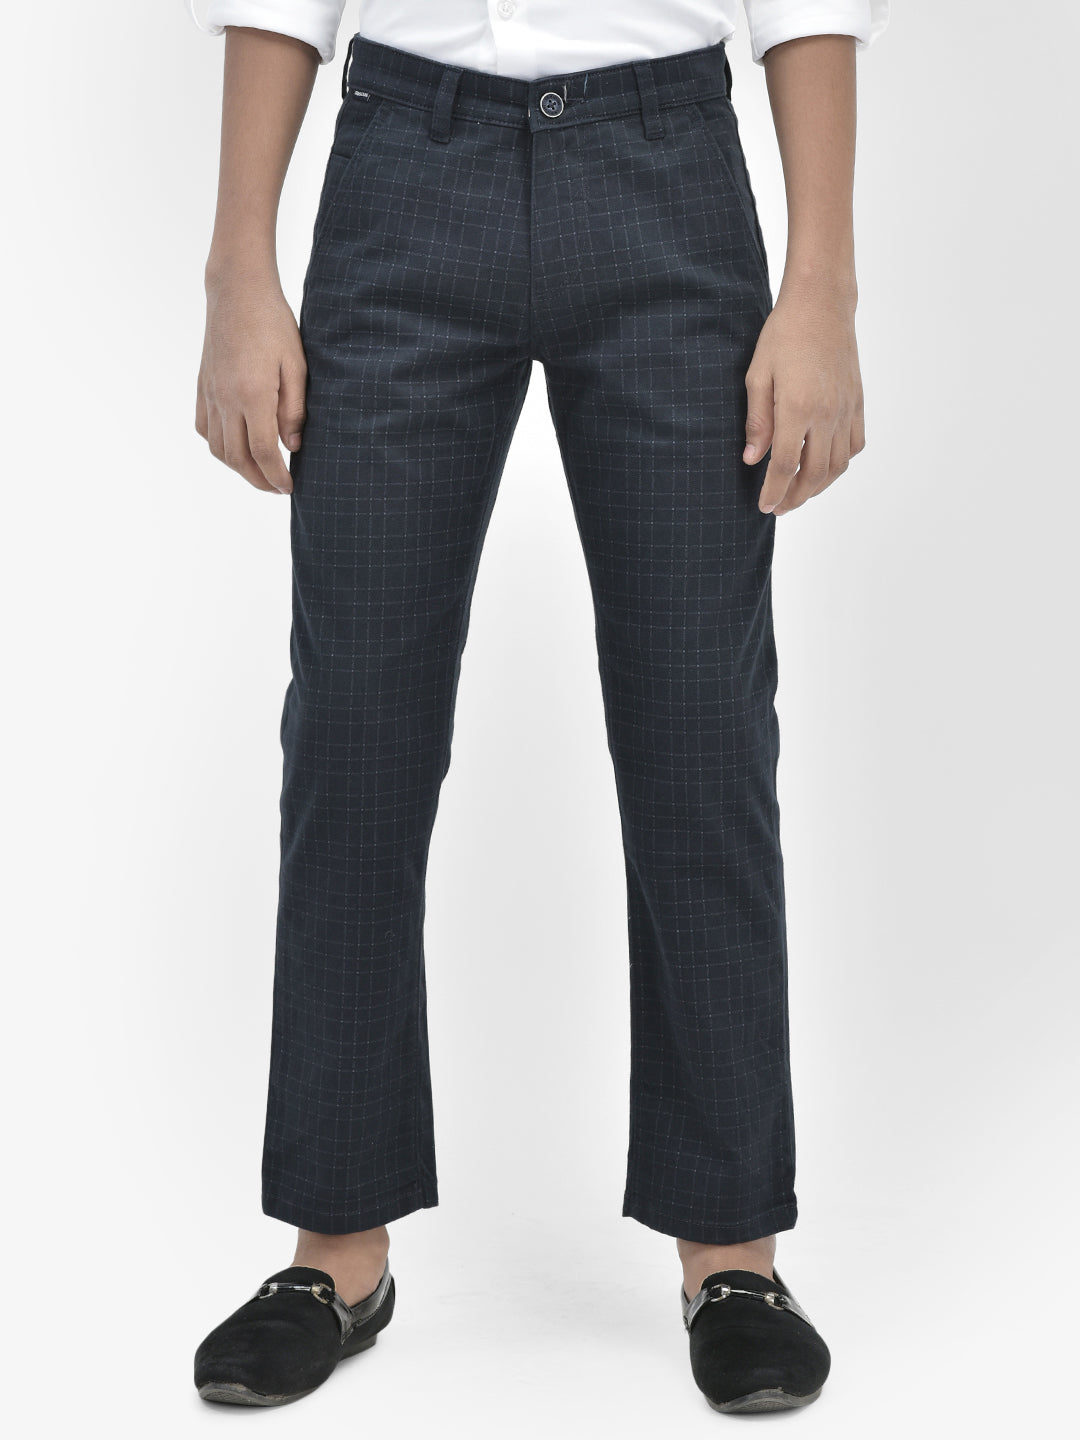 Checked Navy Blue Trousers-Boys Trousers-Crimsoune Club